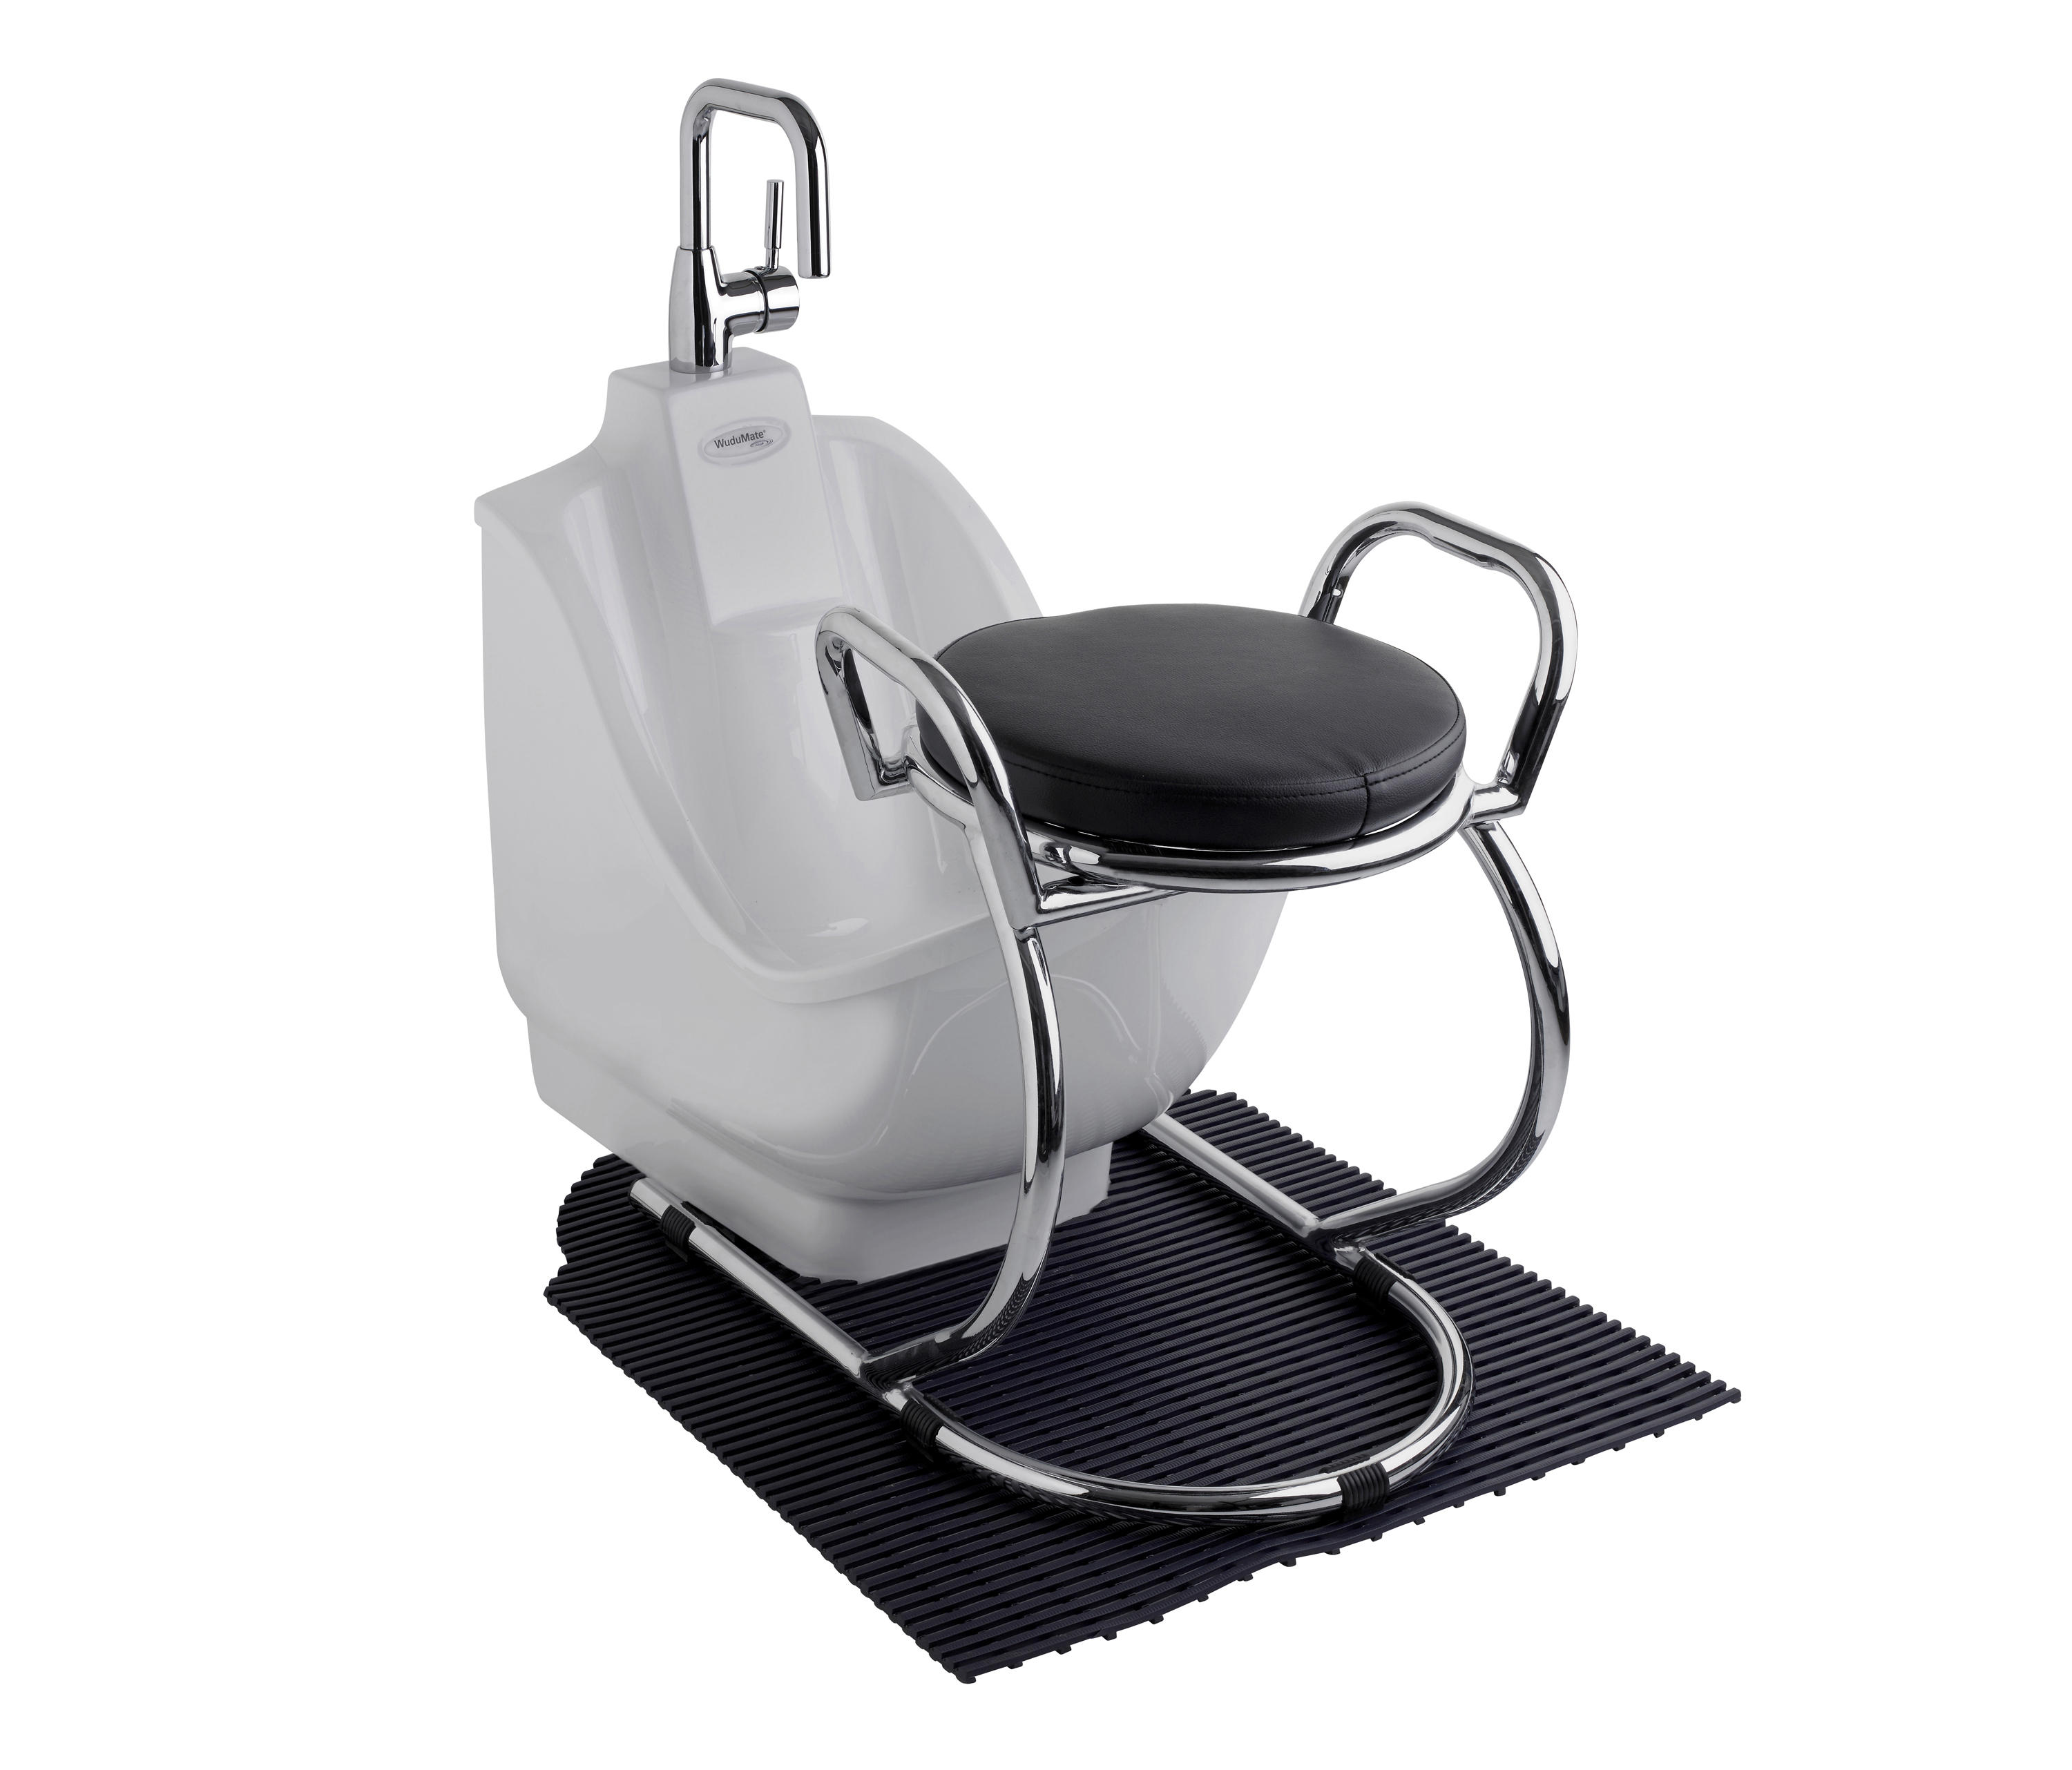 Wudumate Compact Porcelain Footbaths From Specialist